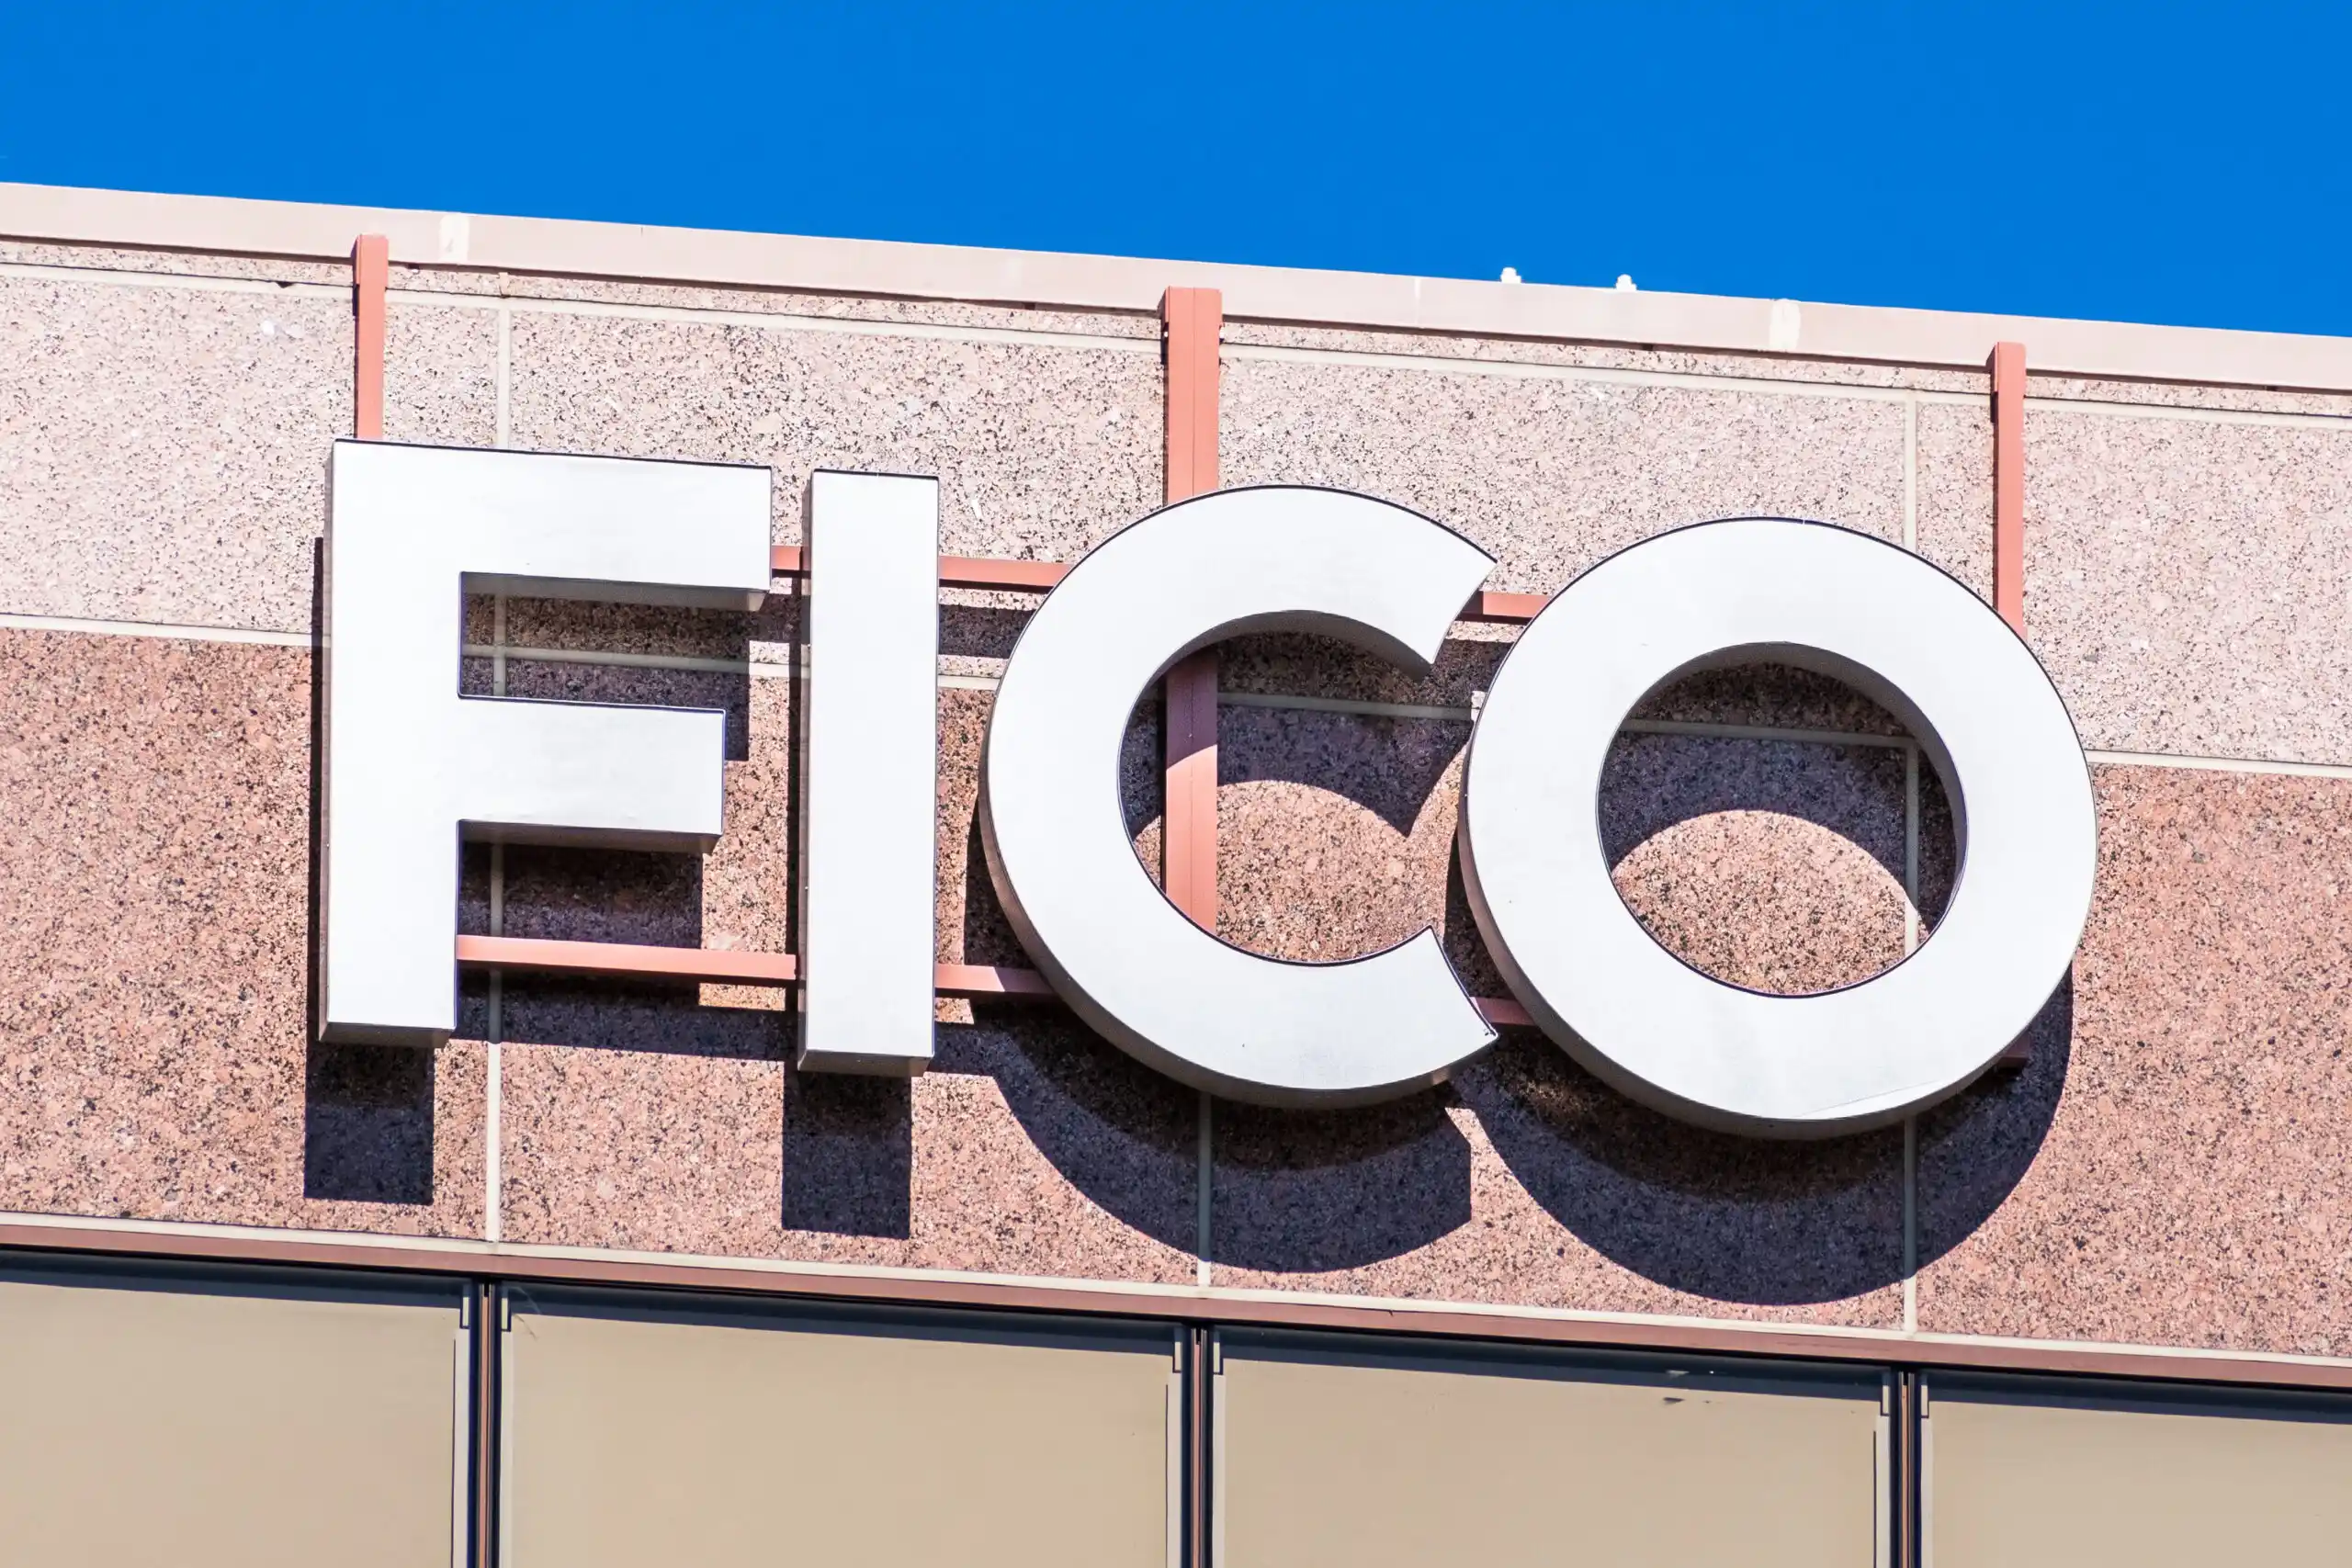 What This New FICO Score Means For Your Credit